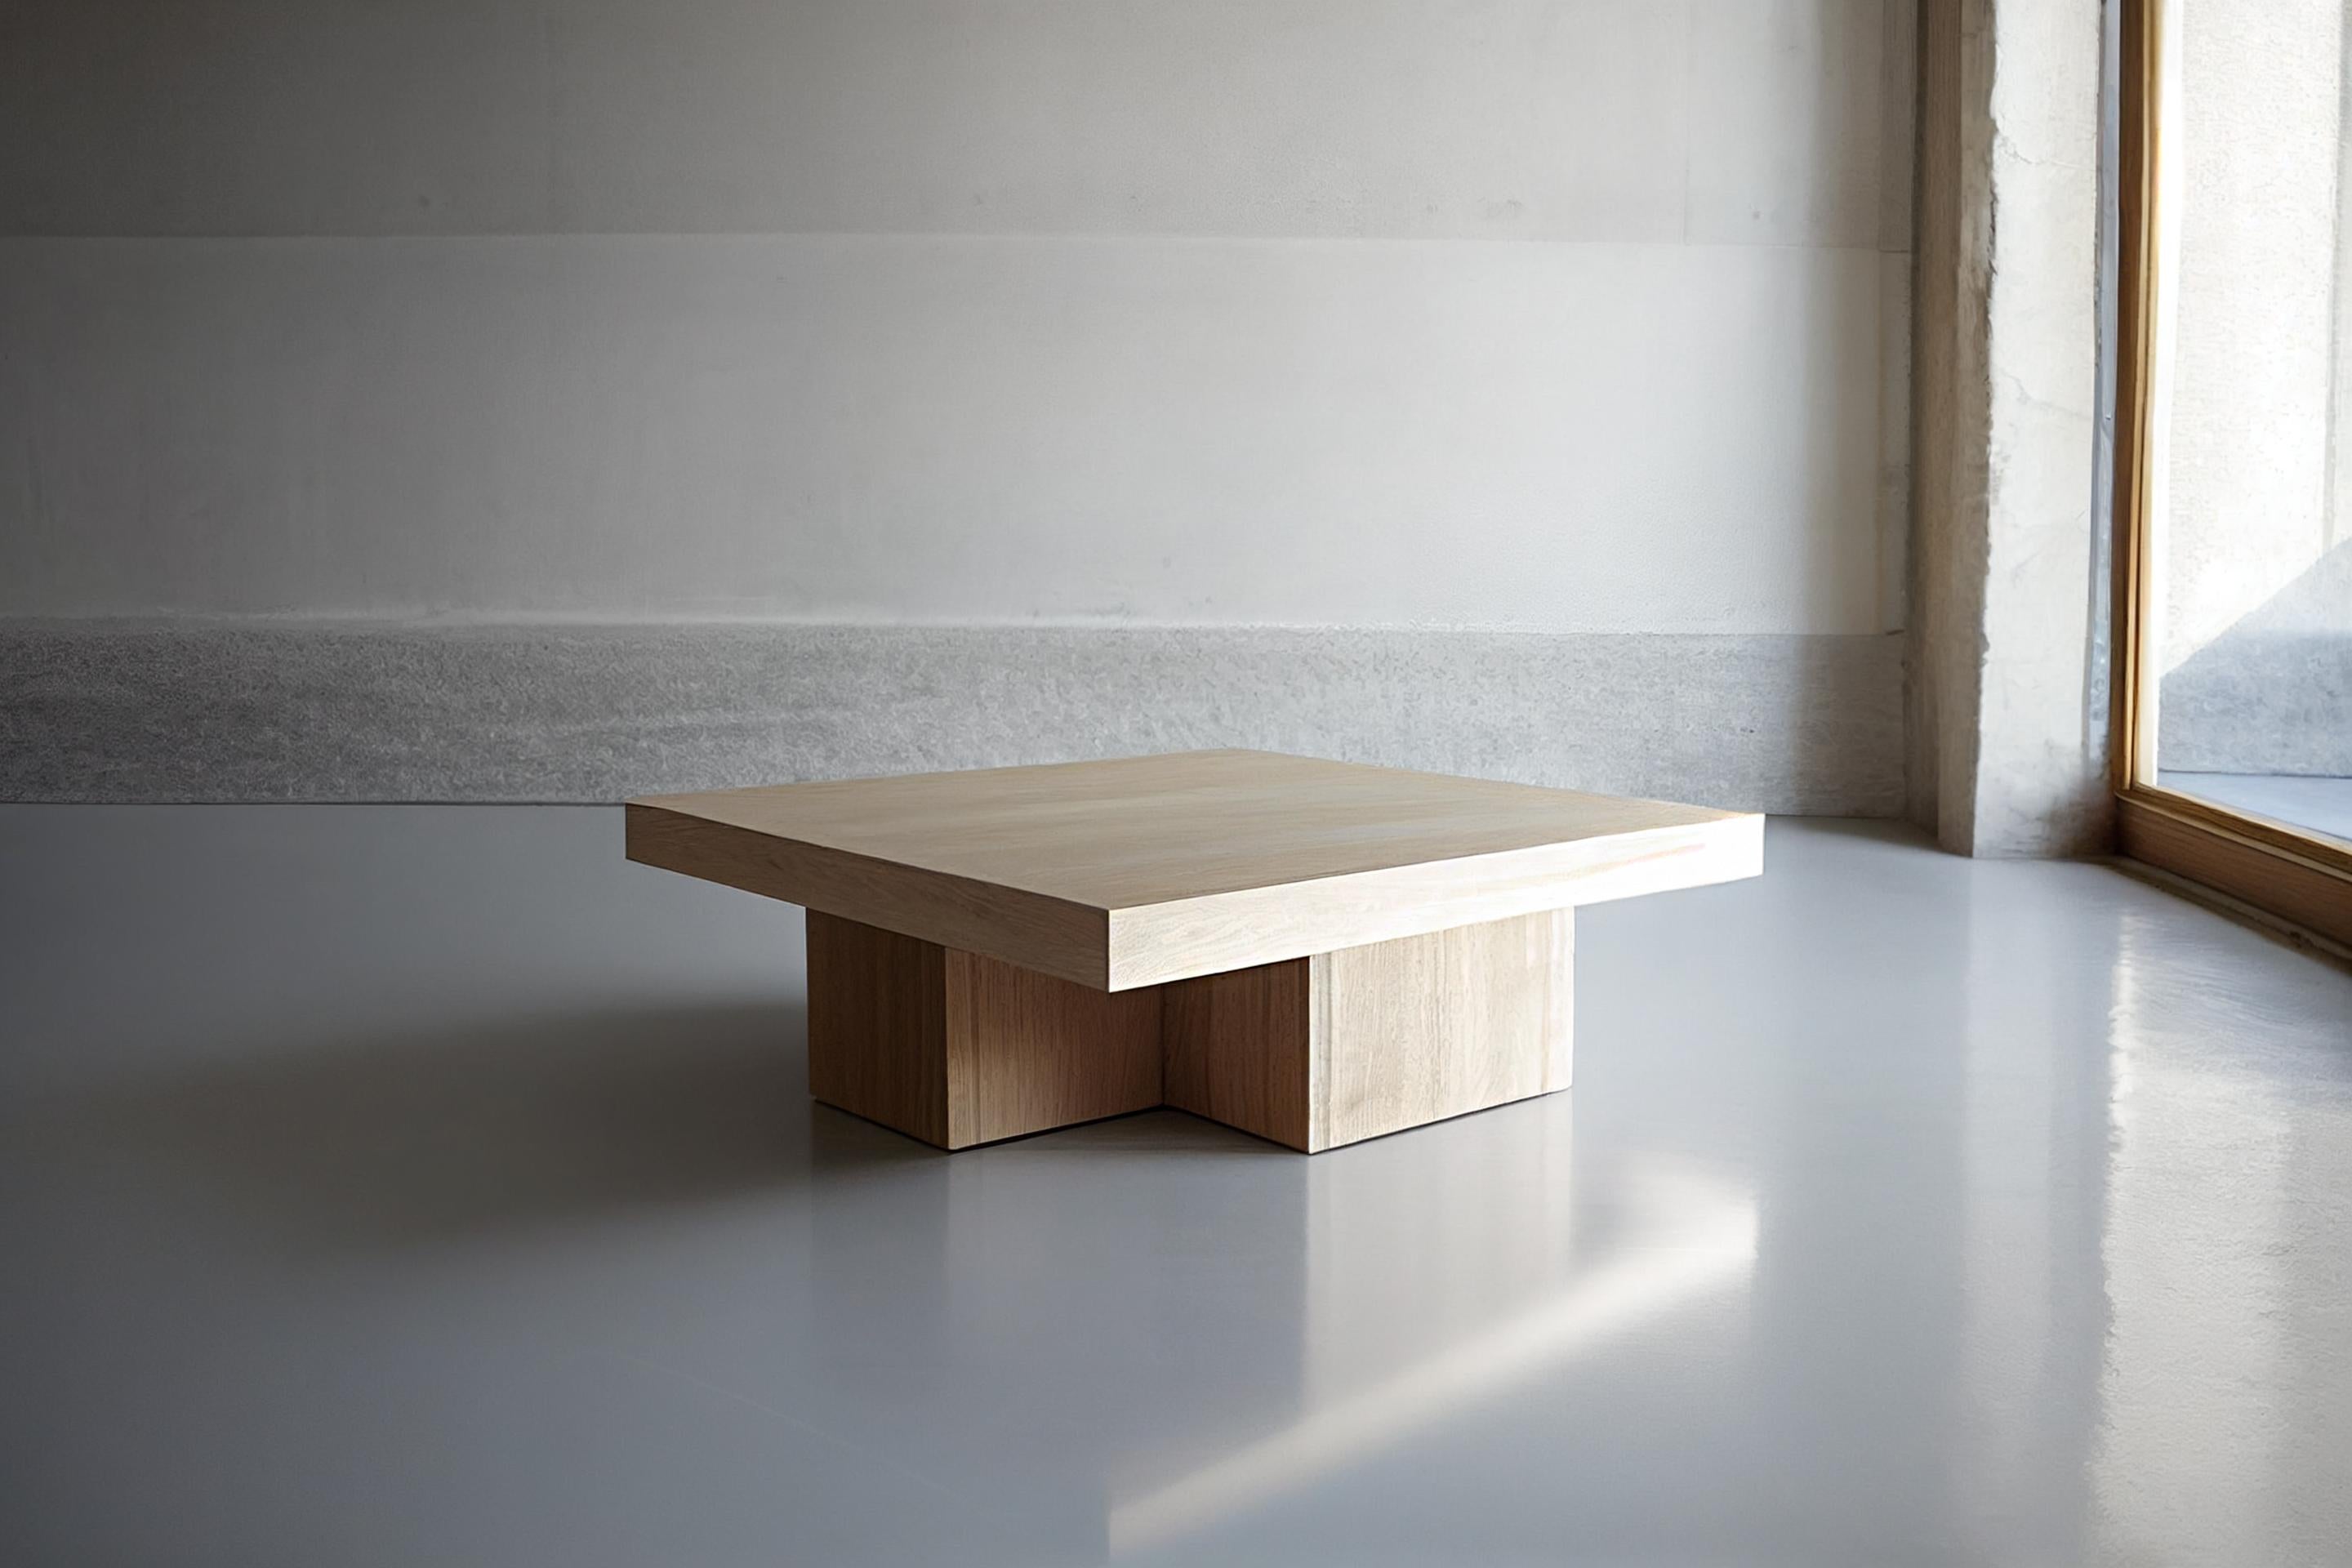 Coffee table made with a top quality mdf structure with a beautiful wood veneer finish. All the pieces are coated with polyurethane with a semi-matt finish.
—
NONO is a Mexican design brand with more than 10 years of experience dedicated to the